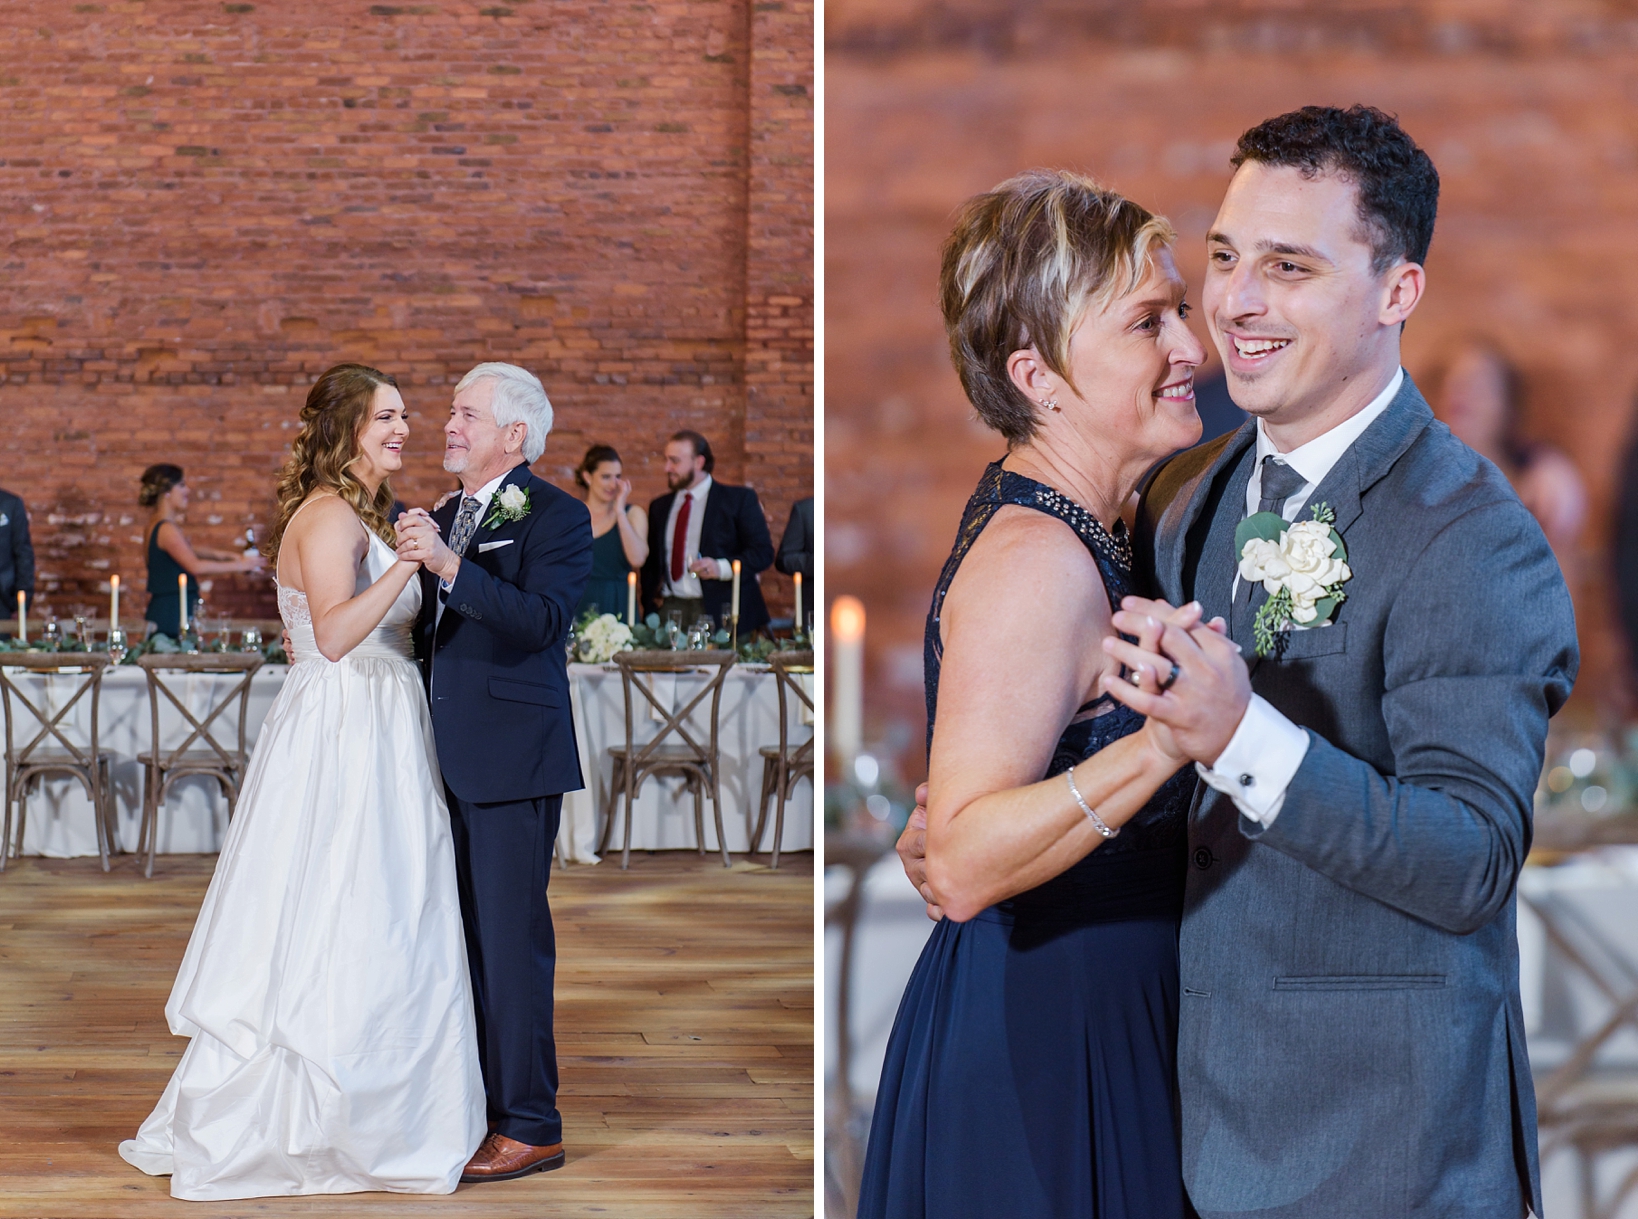 Father/Daughter and Mother/Son dance during the reception by Sarah & Ben Photography